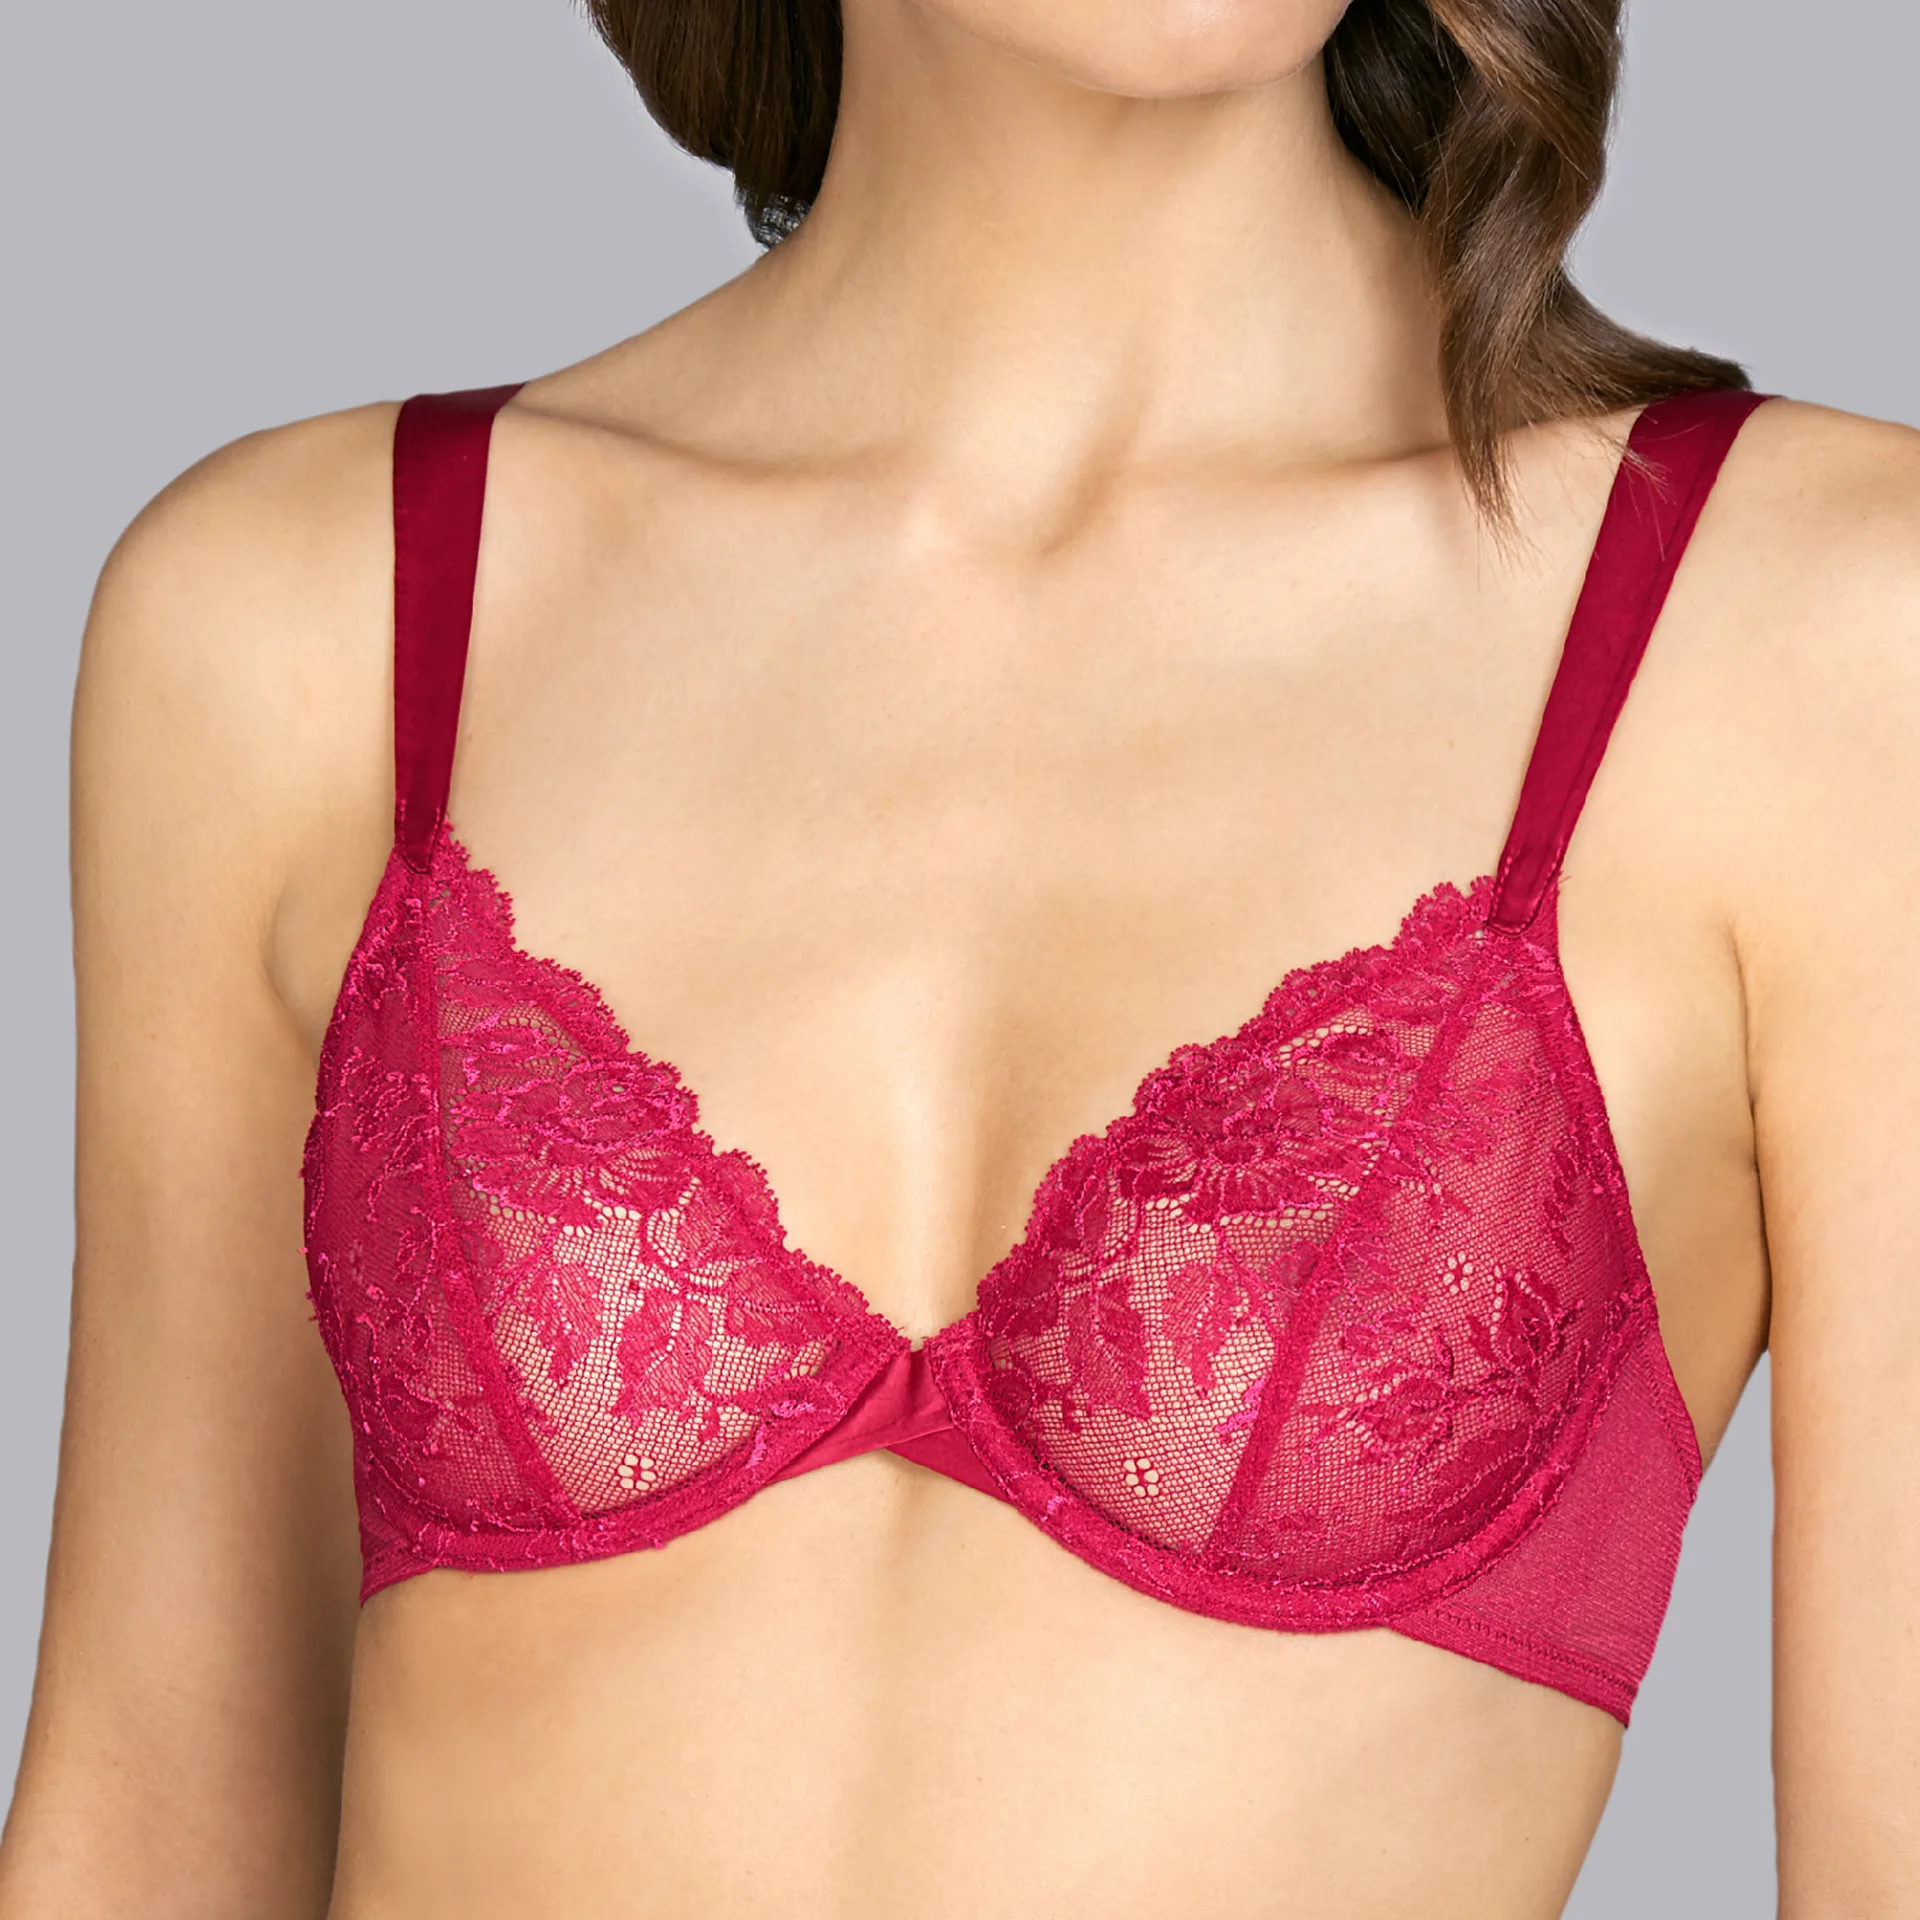 ANDRES SARDA full cup wire bra without padding.